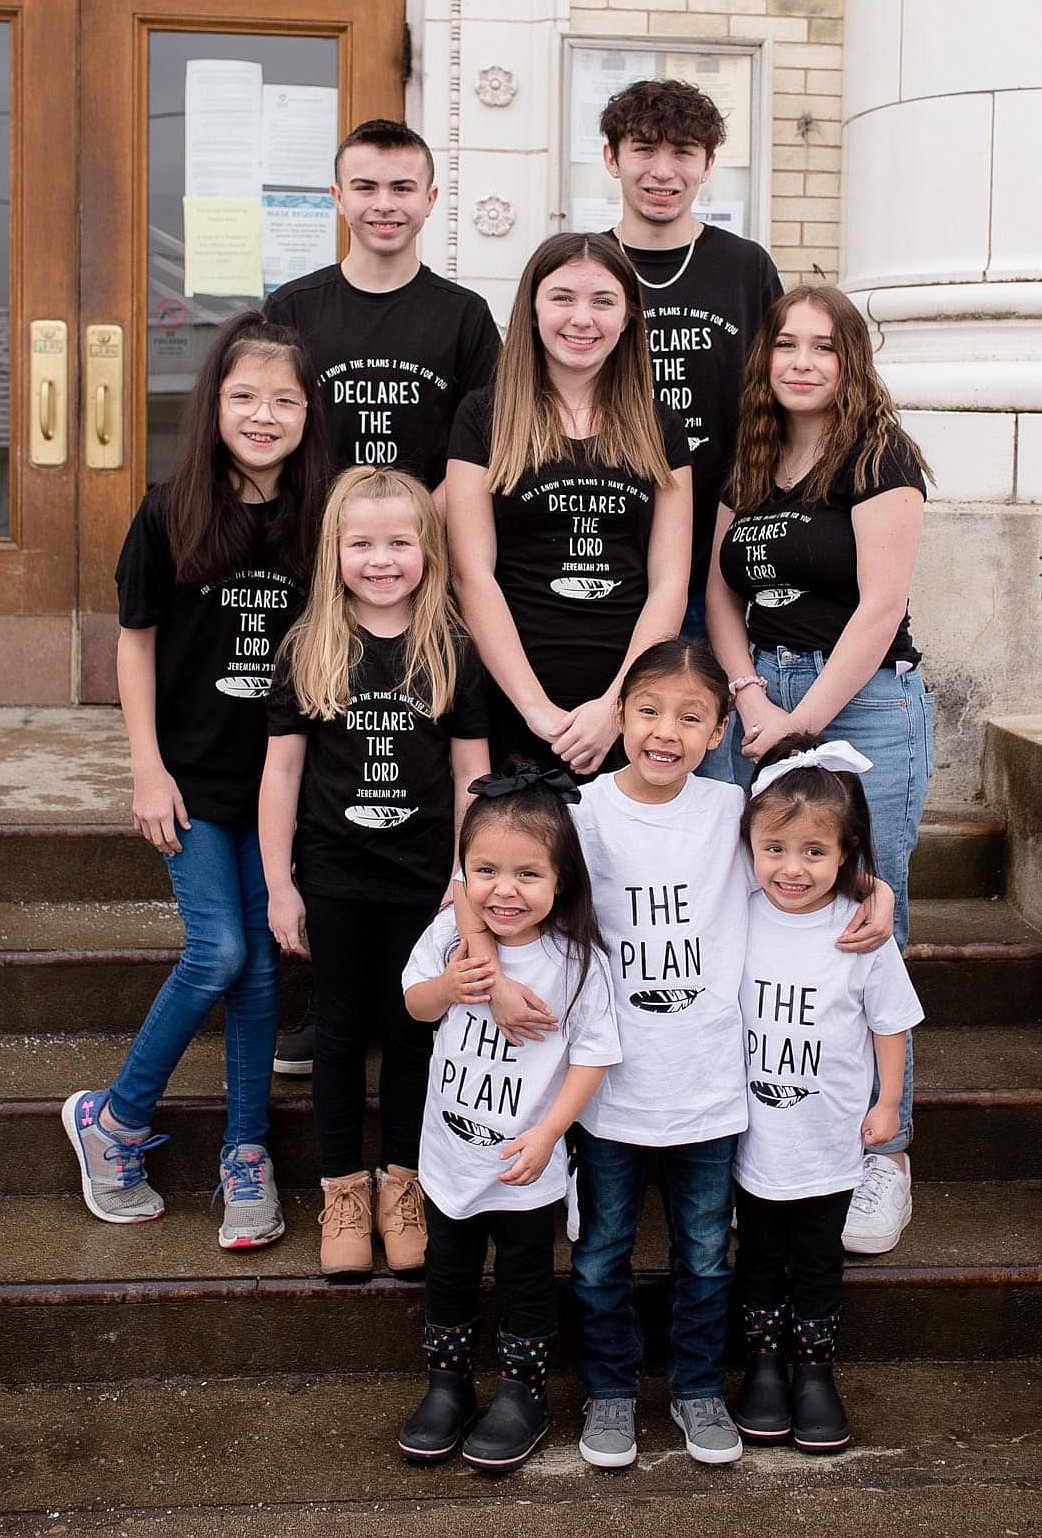 The Walker kids on the day of the adoption of Jeremiah, Miya and Aaliyah on Feb. 24. Back row, from left: Carter and Cade. Second row: Dakota, Sawyer, Kylee and Halle. Front row: Aaliyah, Jeremiah and Miya.